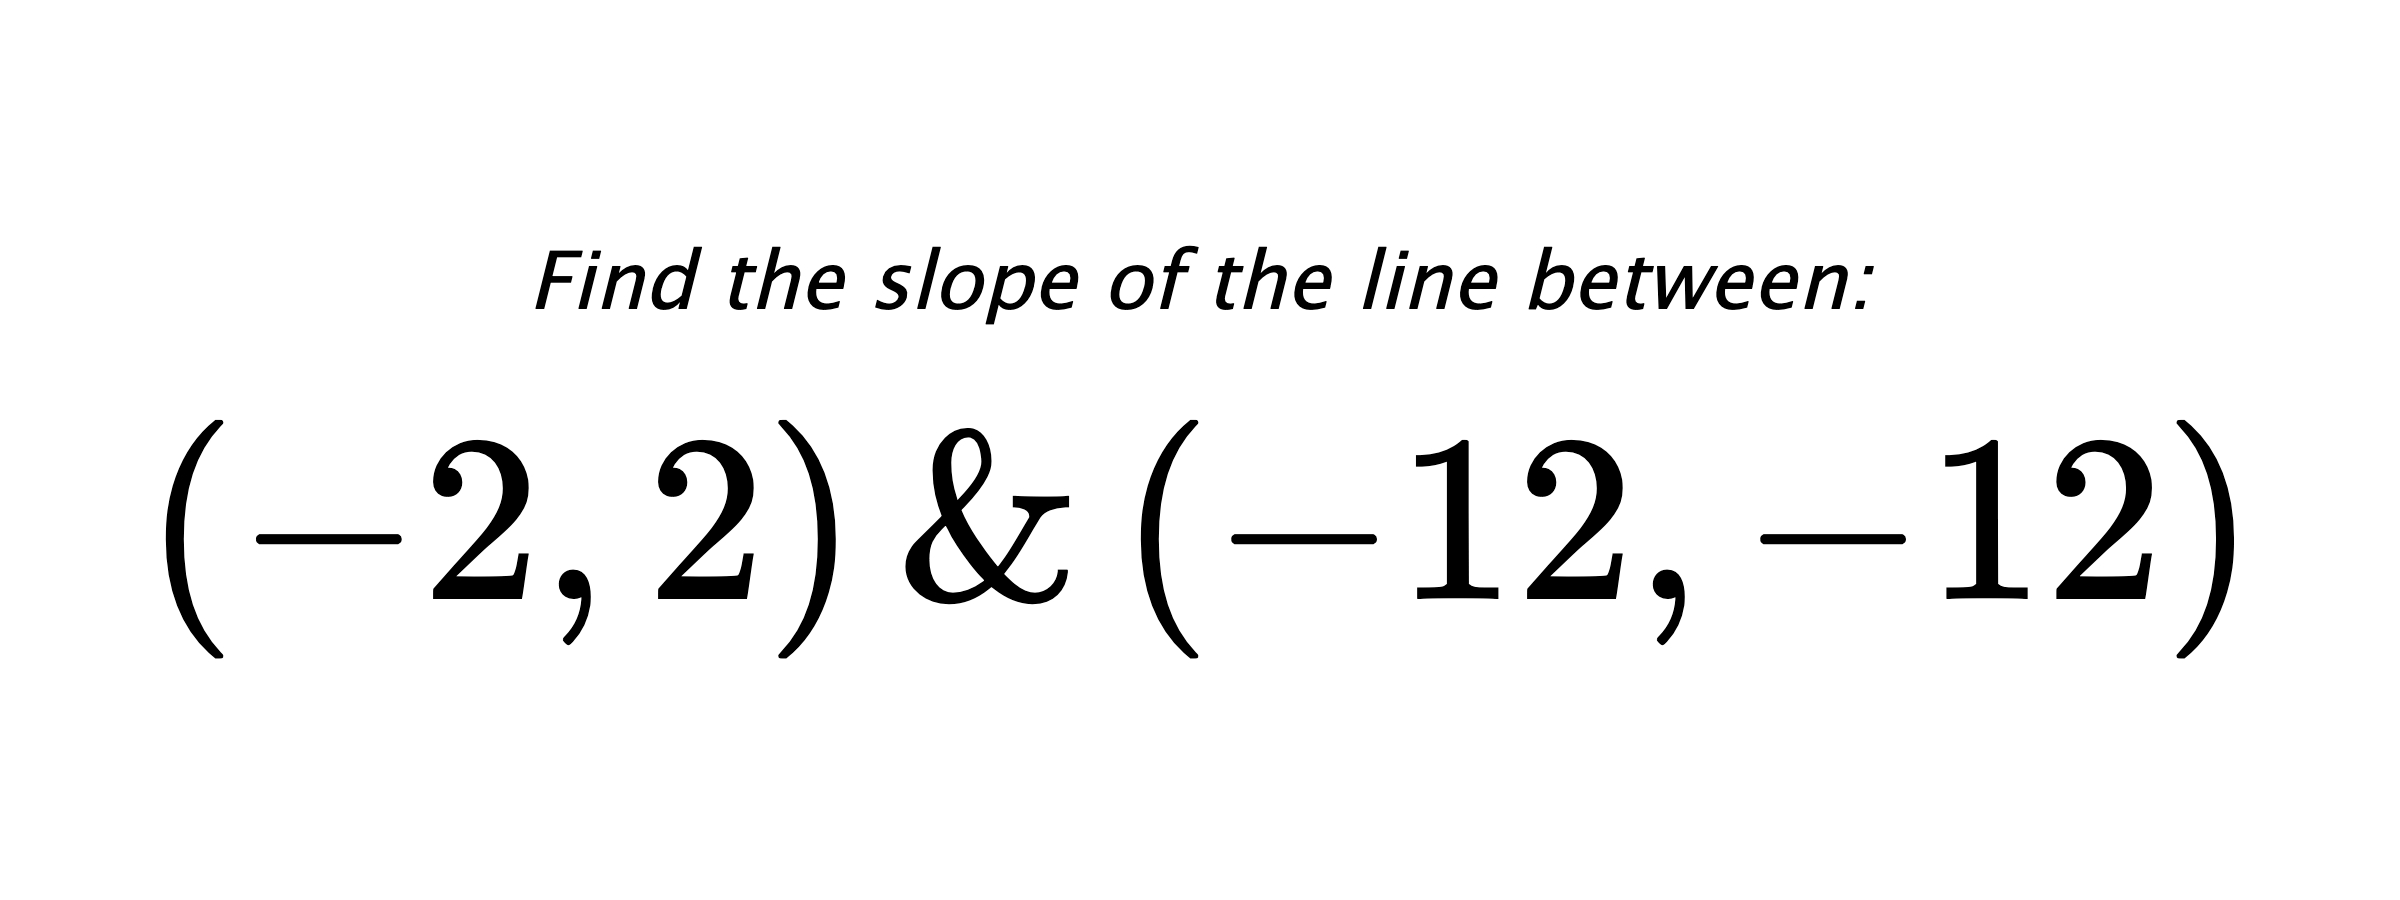 Find the slope of the line between: $ (-2,2) \hspace{0.5cm} \text{&} \hspace{0.5cm} (-12,-12) $